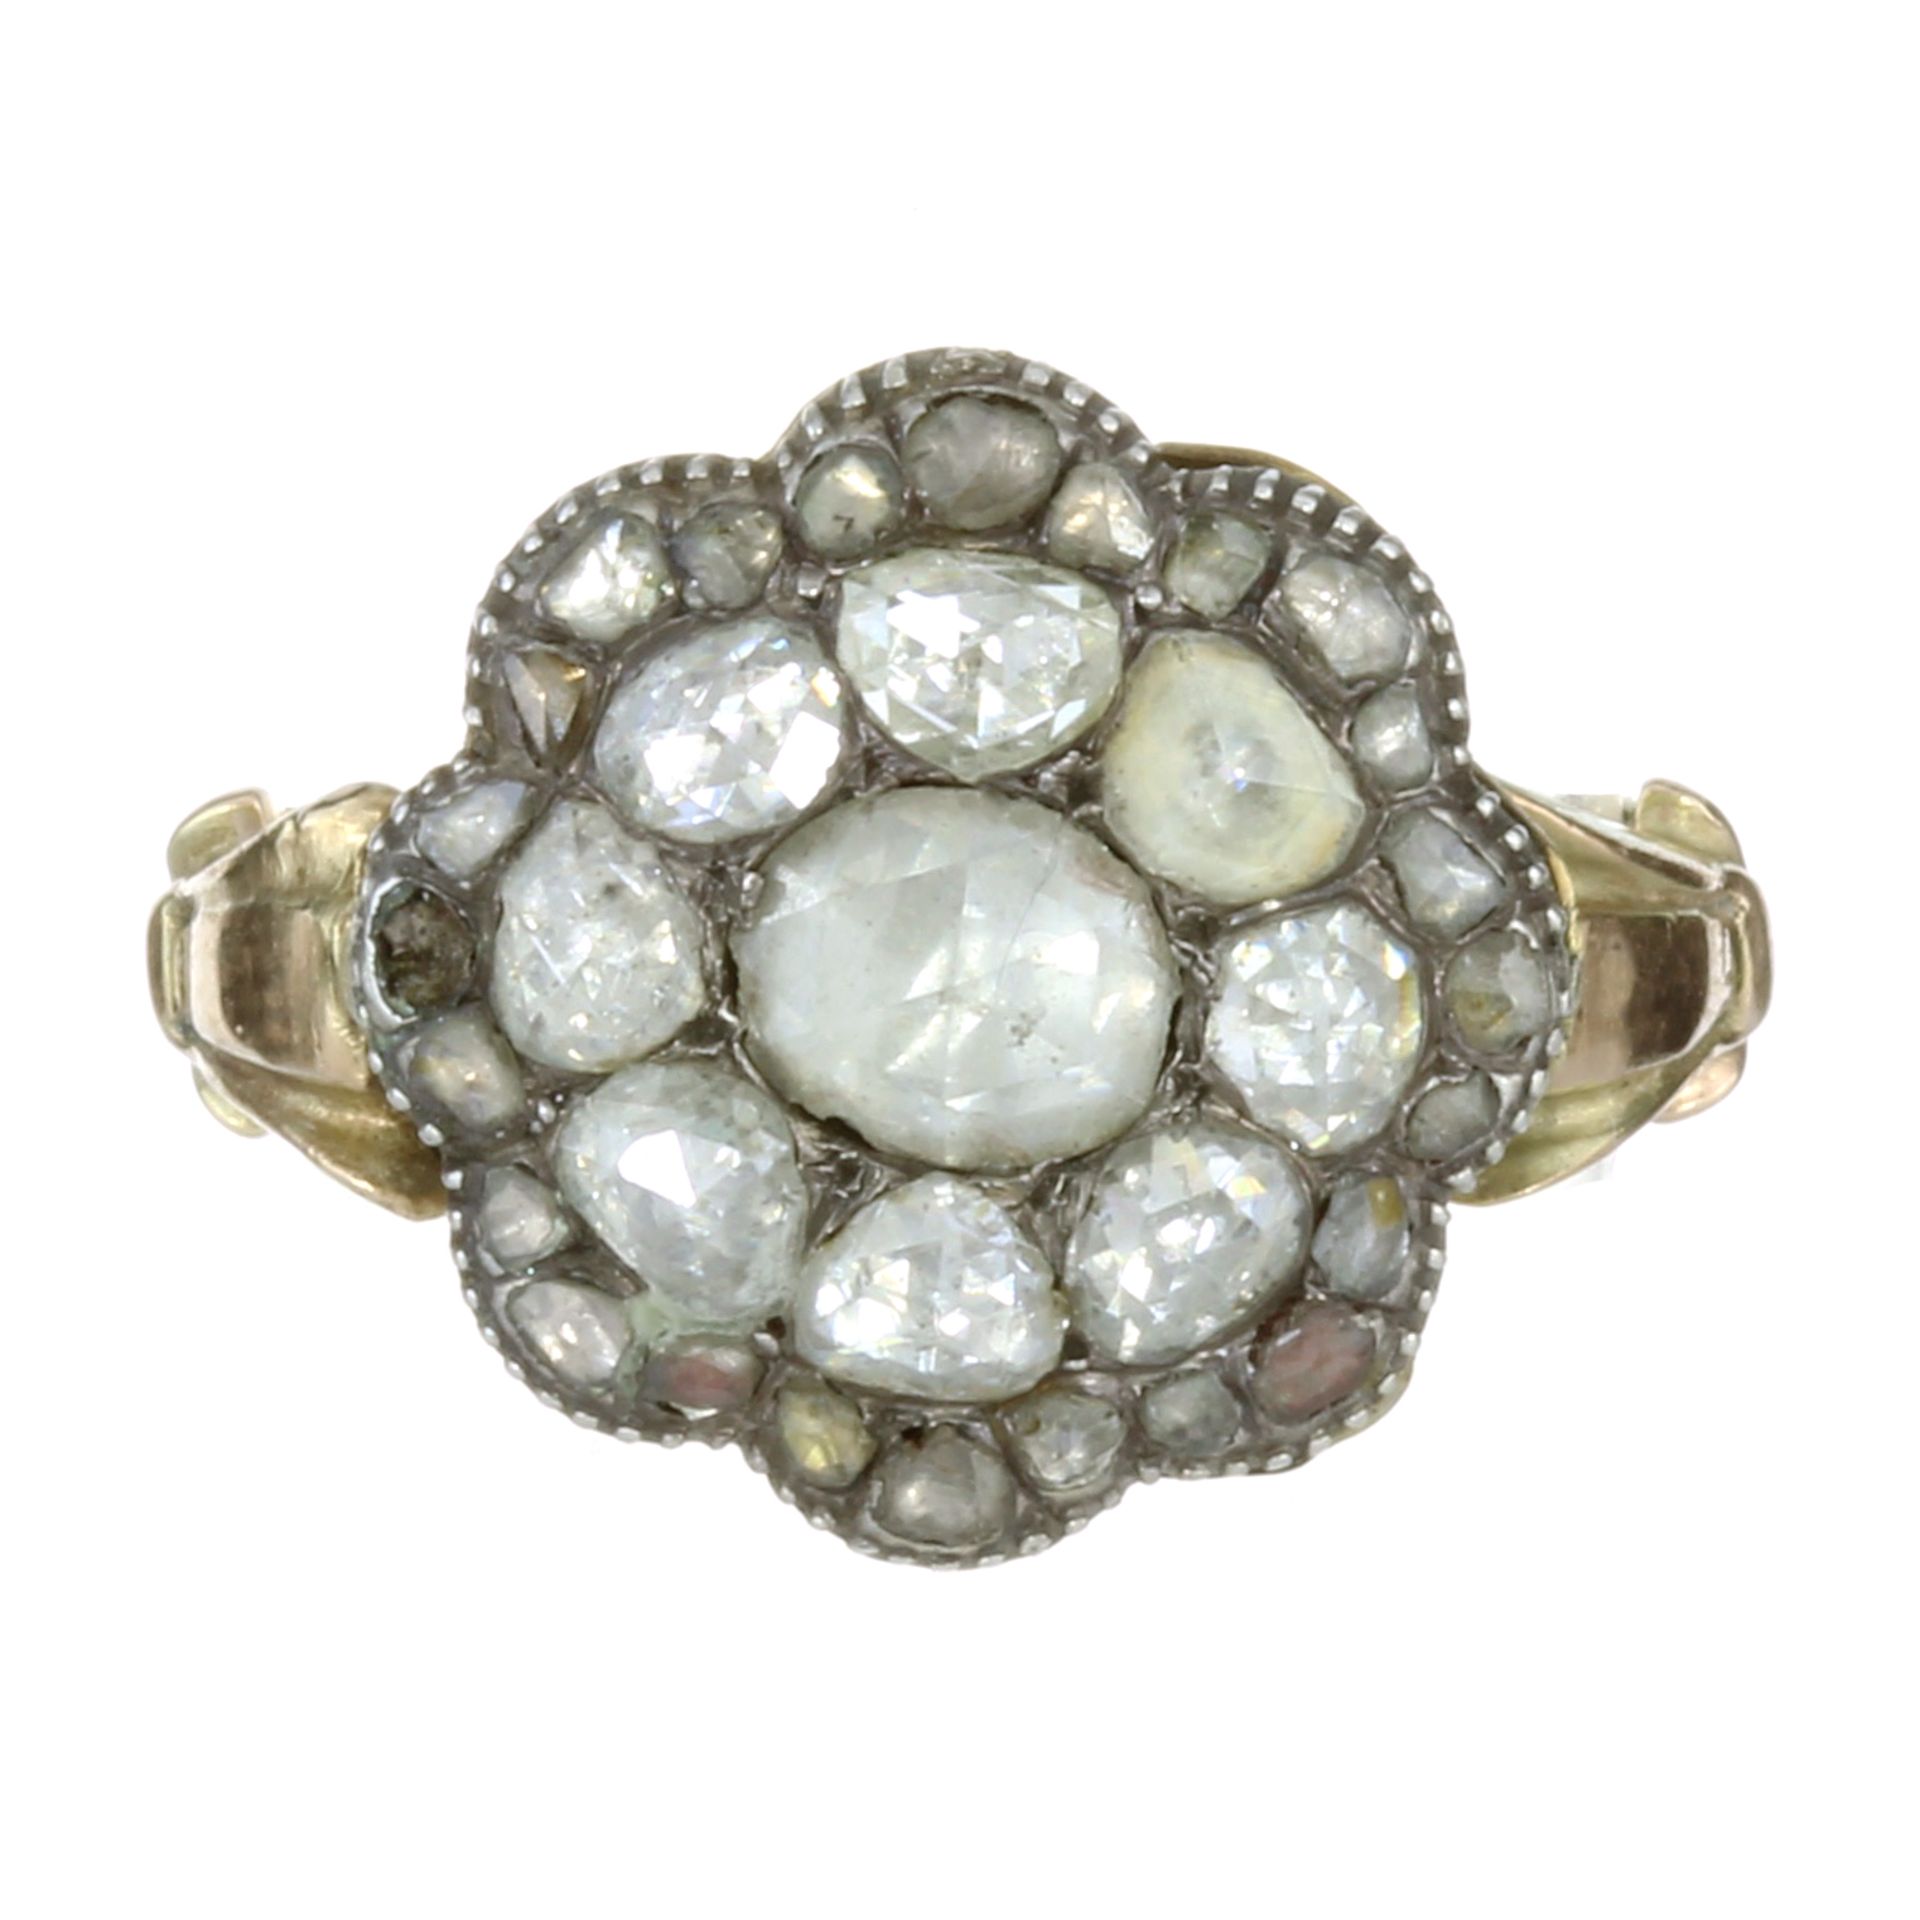 A DIAMOND CLUSTER RING, 19TH CENTURY in high carat yellow gold and silver, set with a central rose